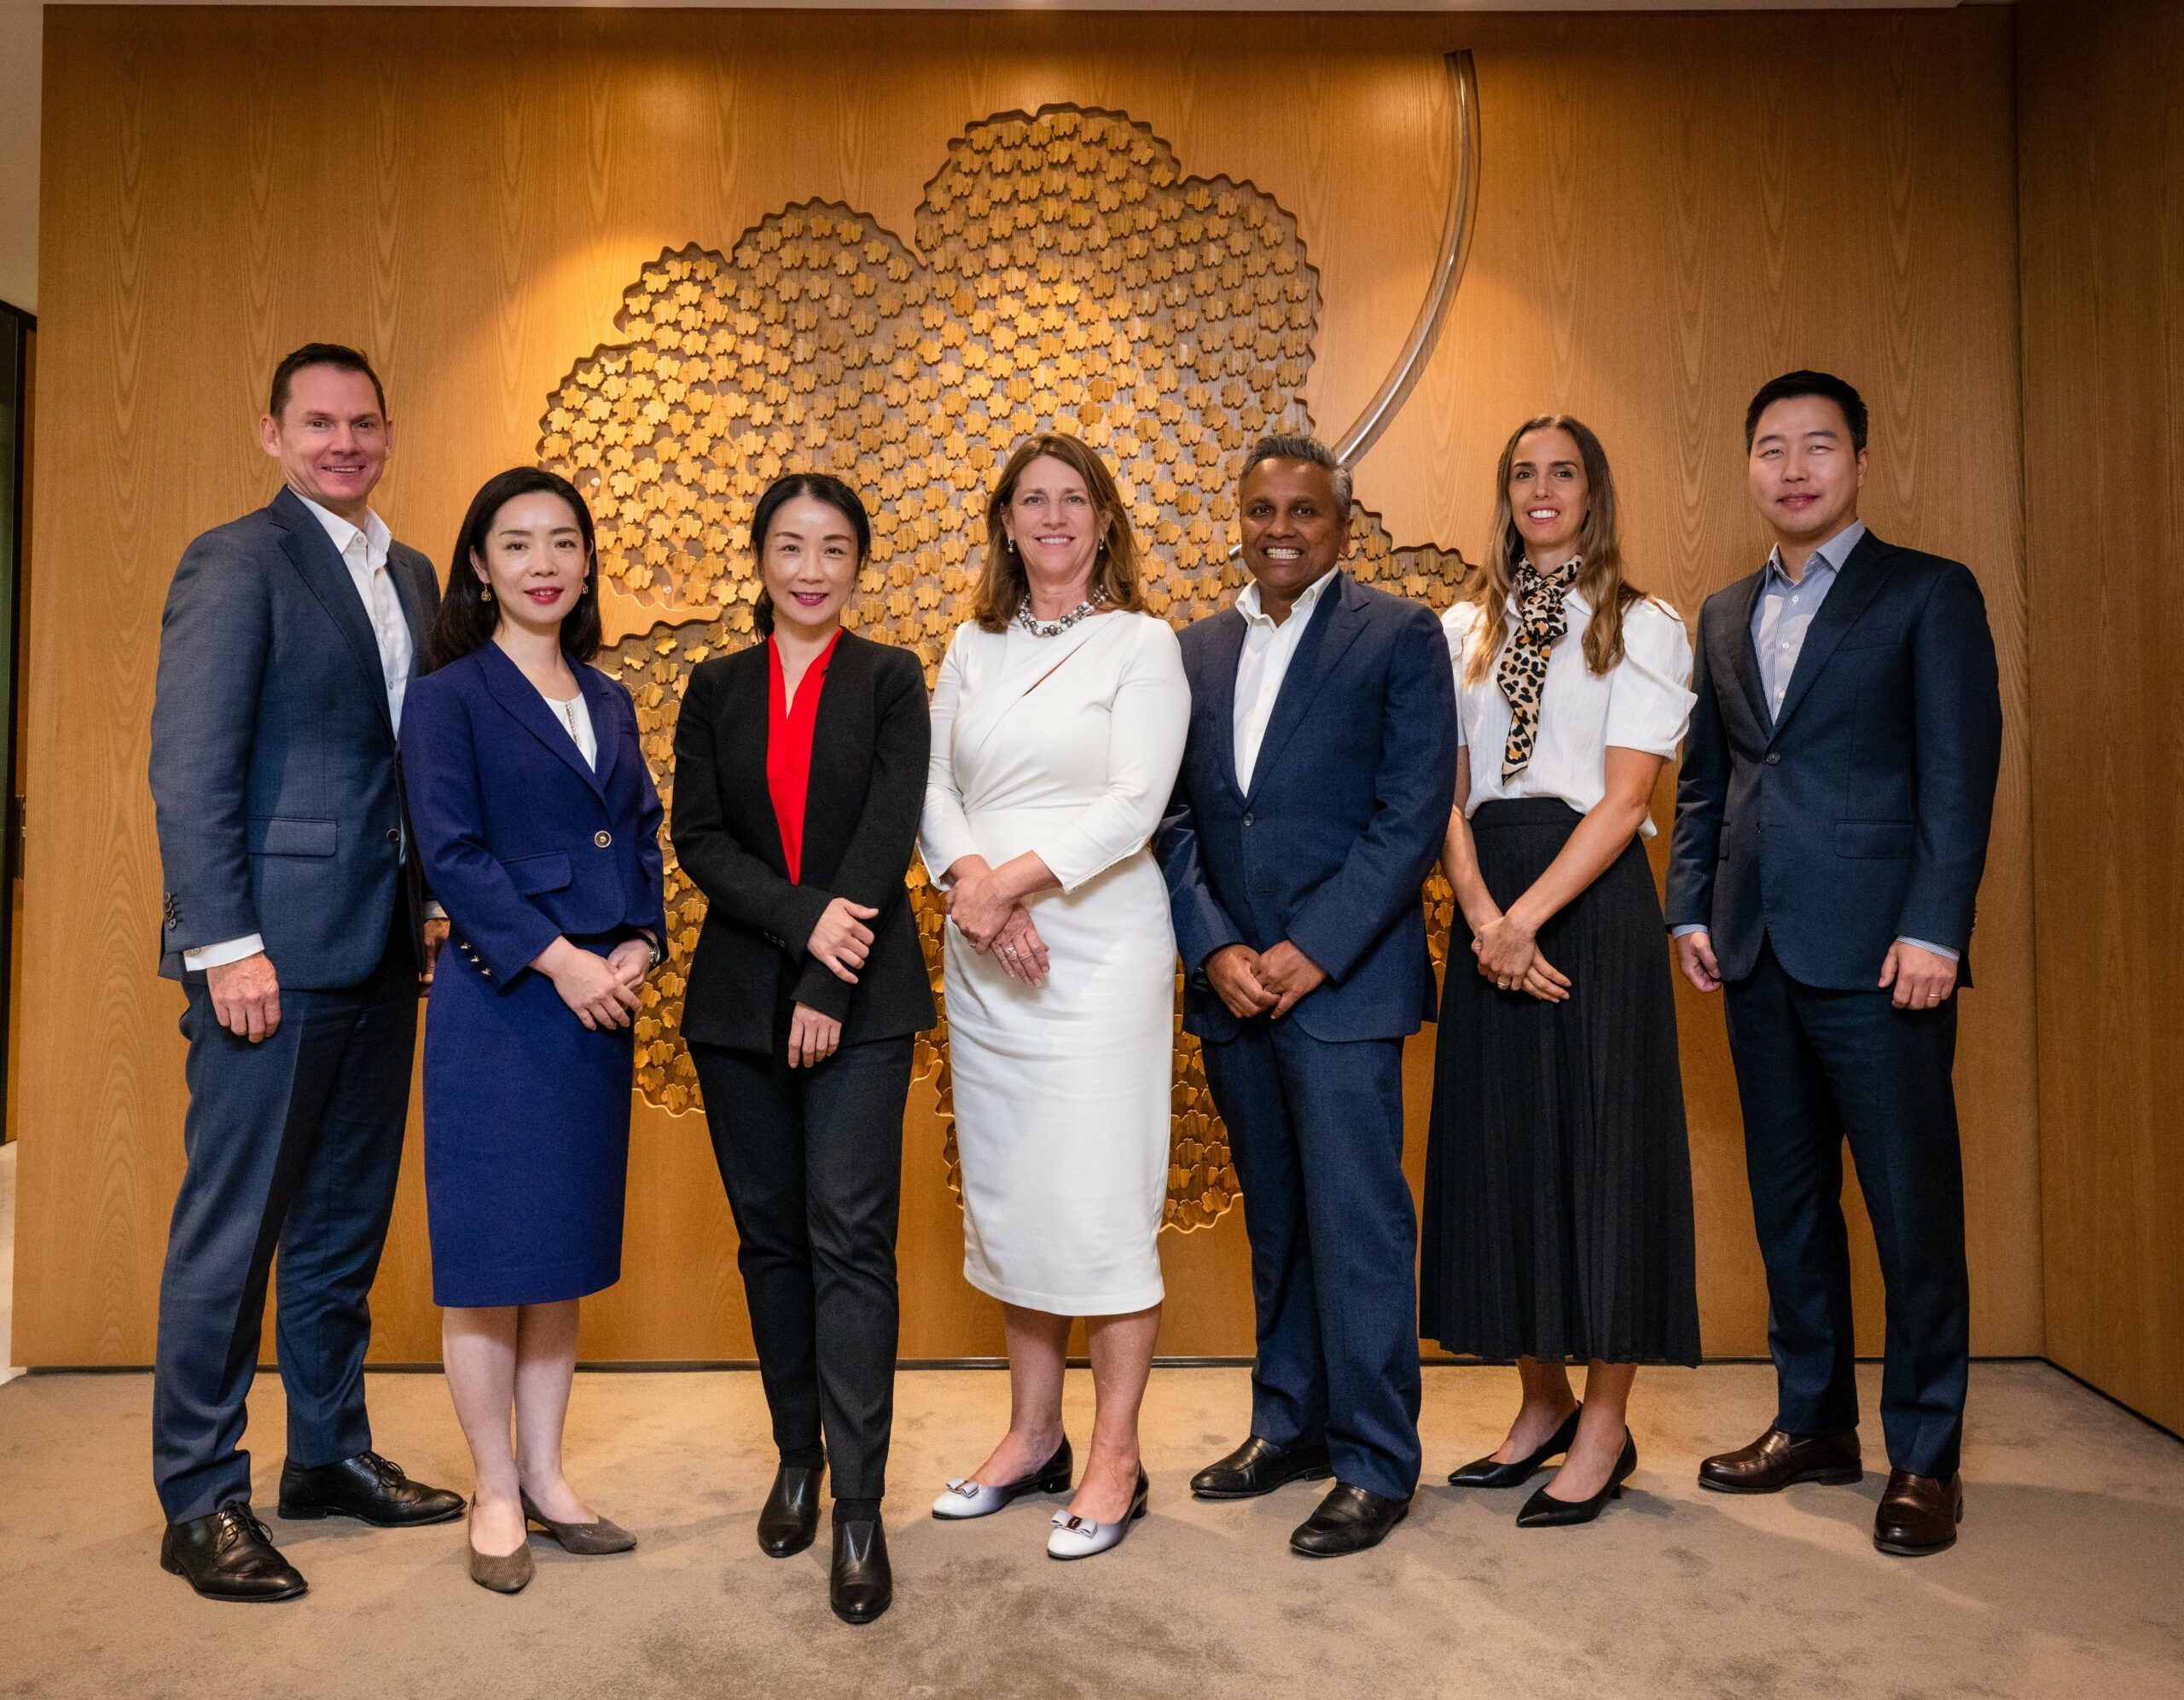 Queensland Government's QIC sets up SG office to boost partnerships across Asia